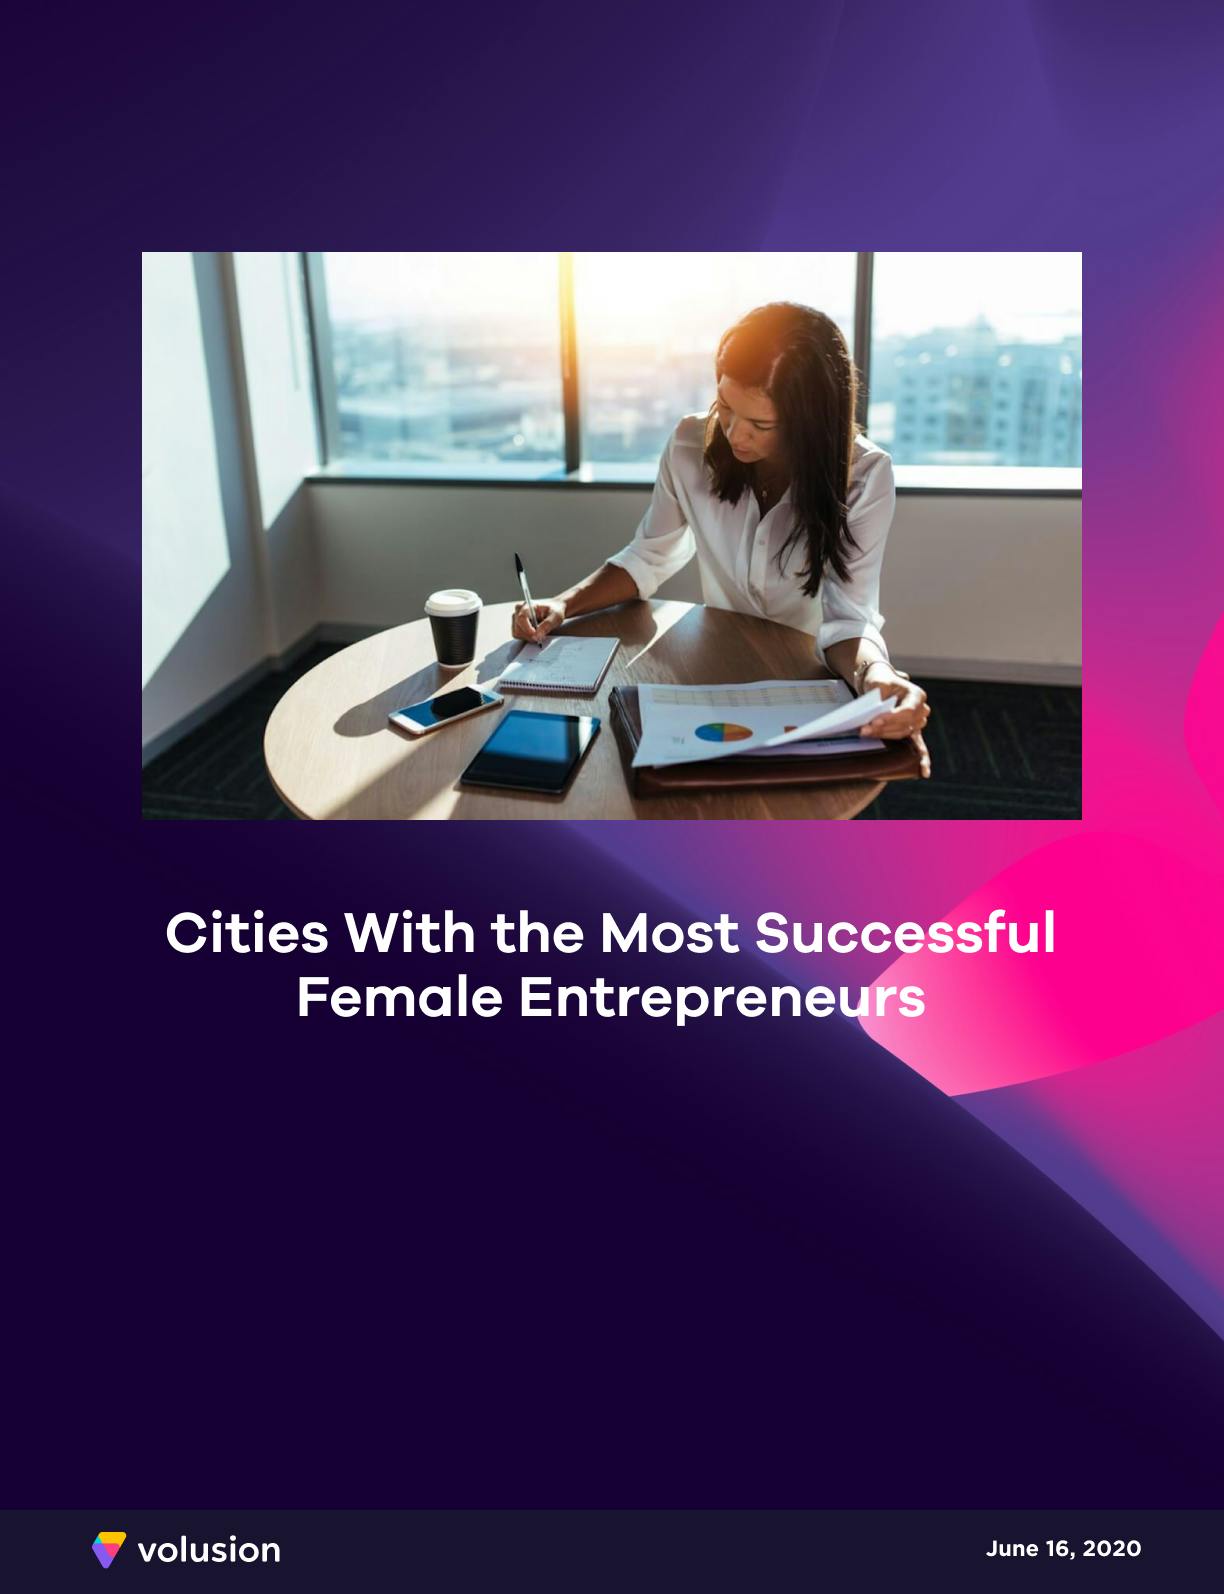 Cities with the Most Successful Female Entrepreneurs